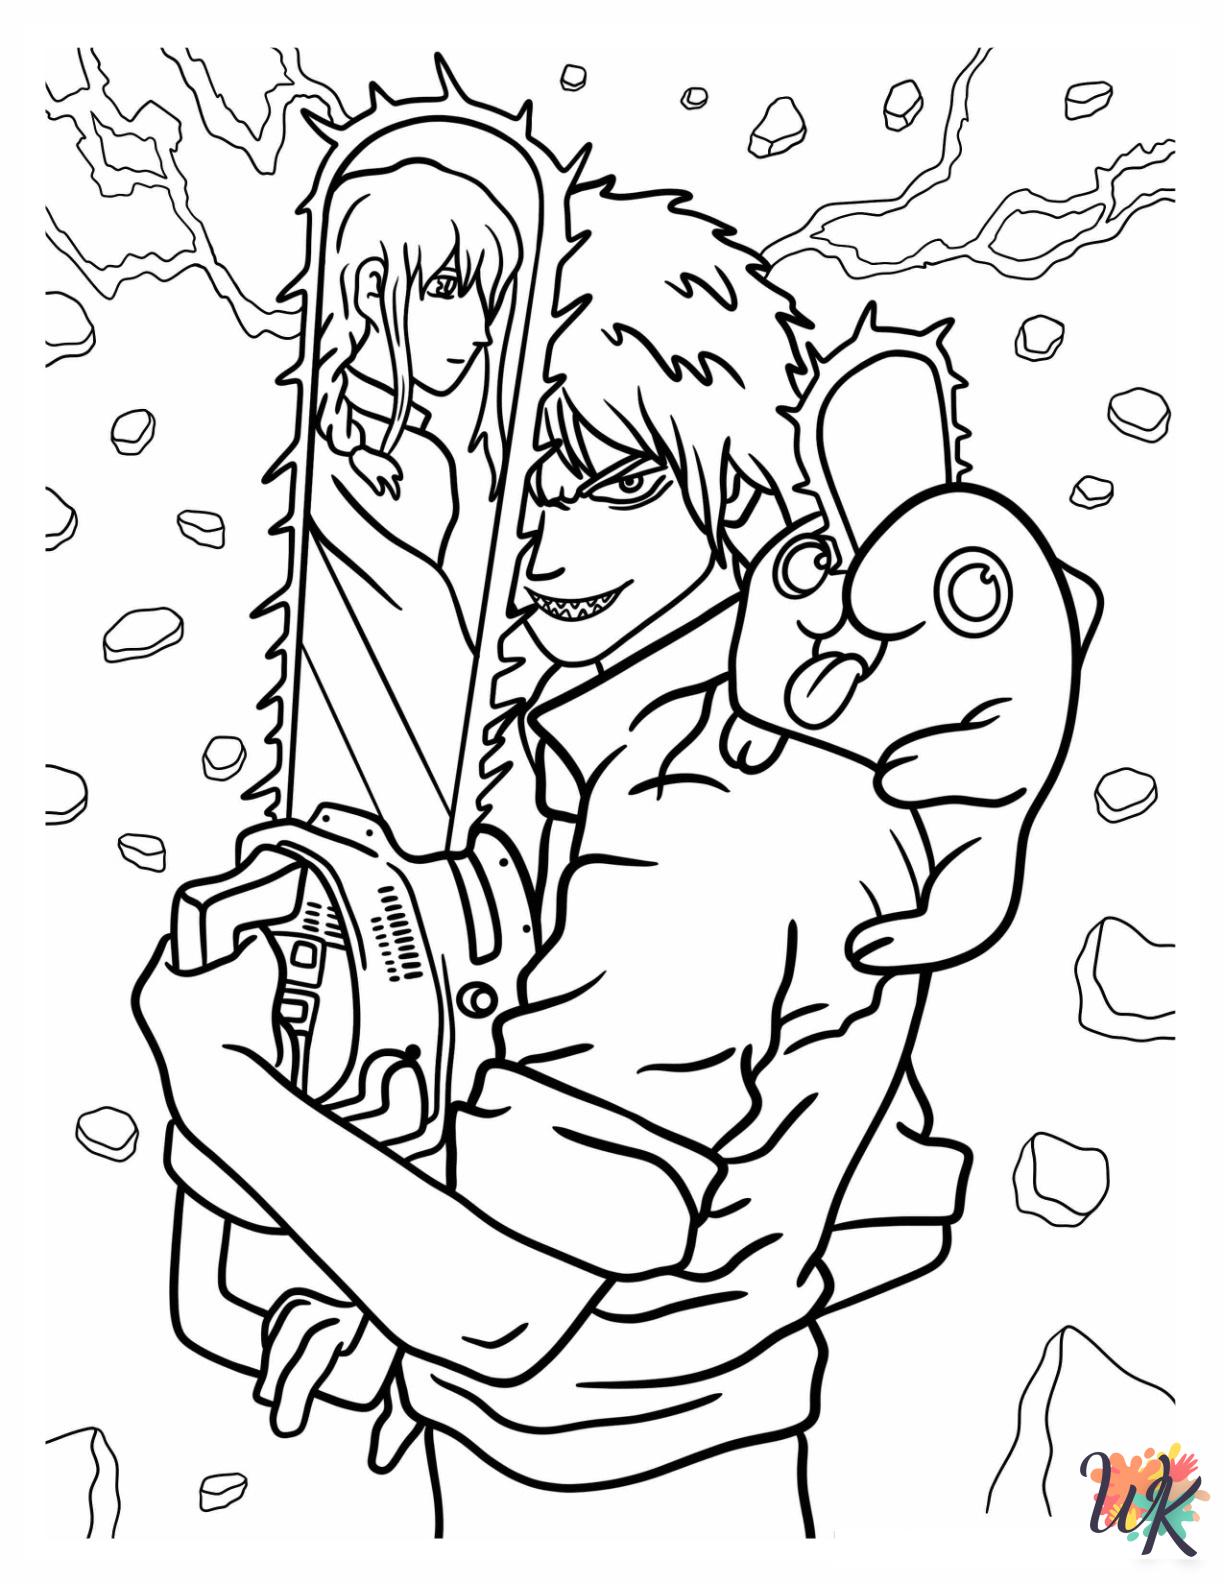 old-fashioned Chainsaw Man coloring pages